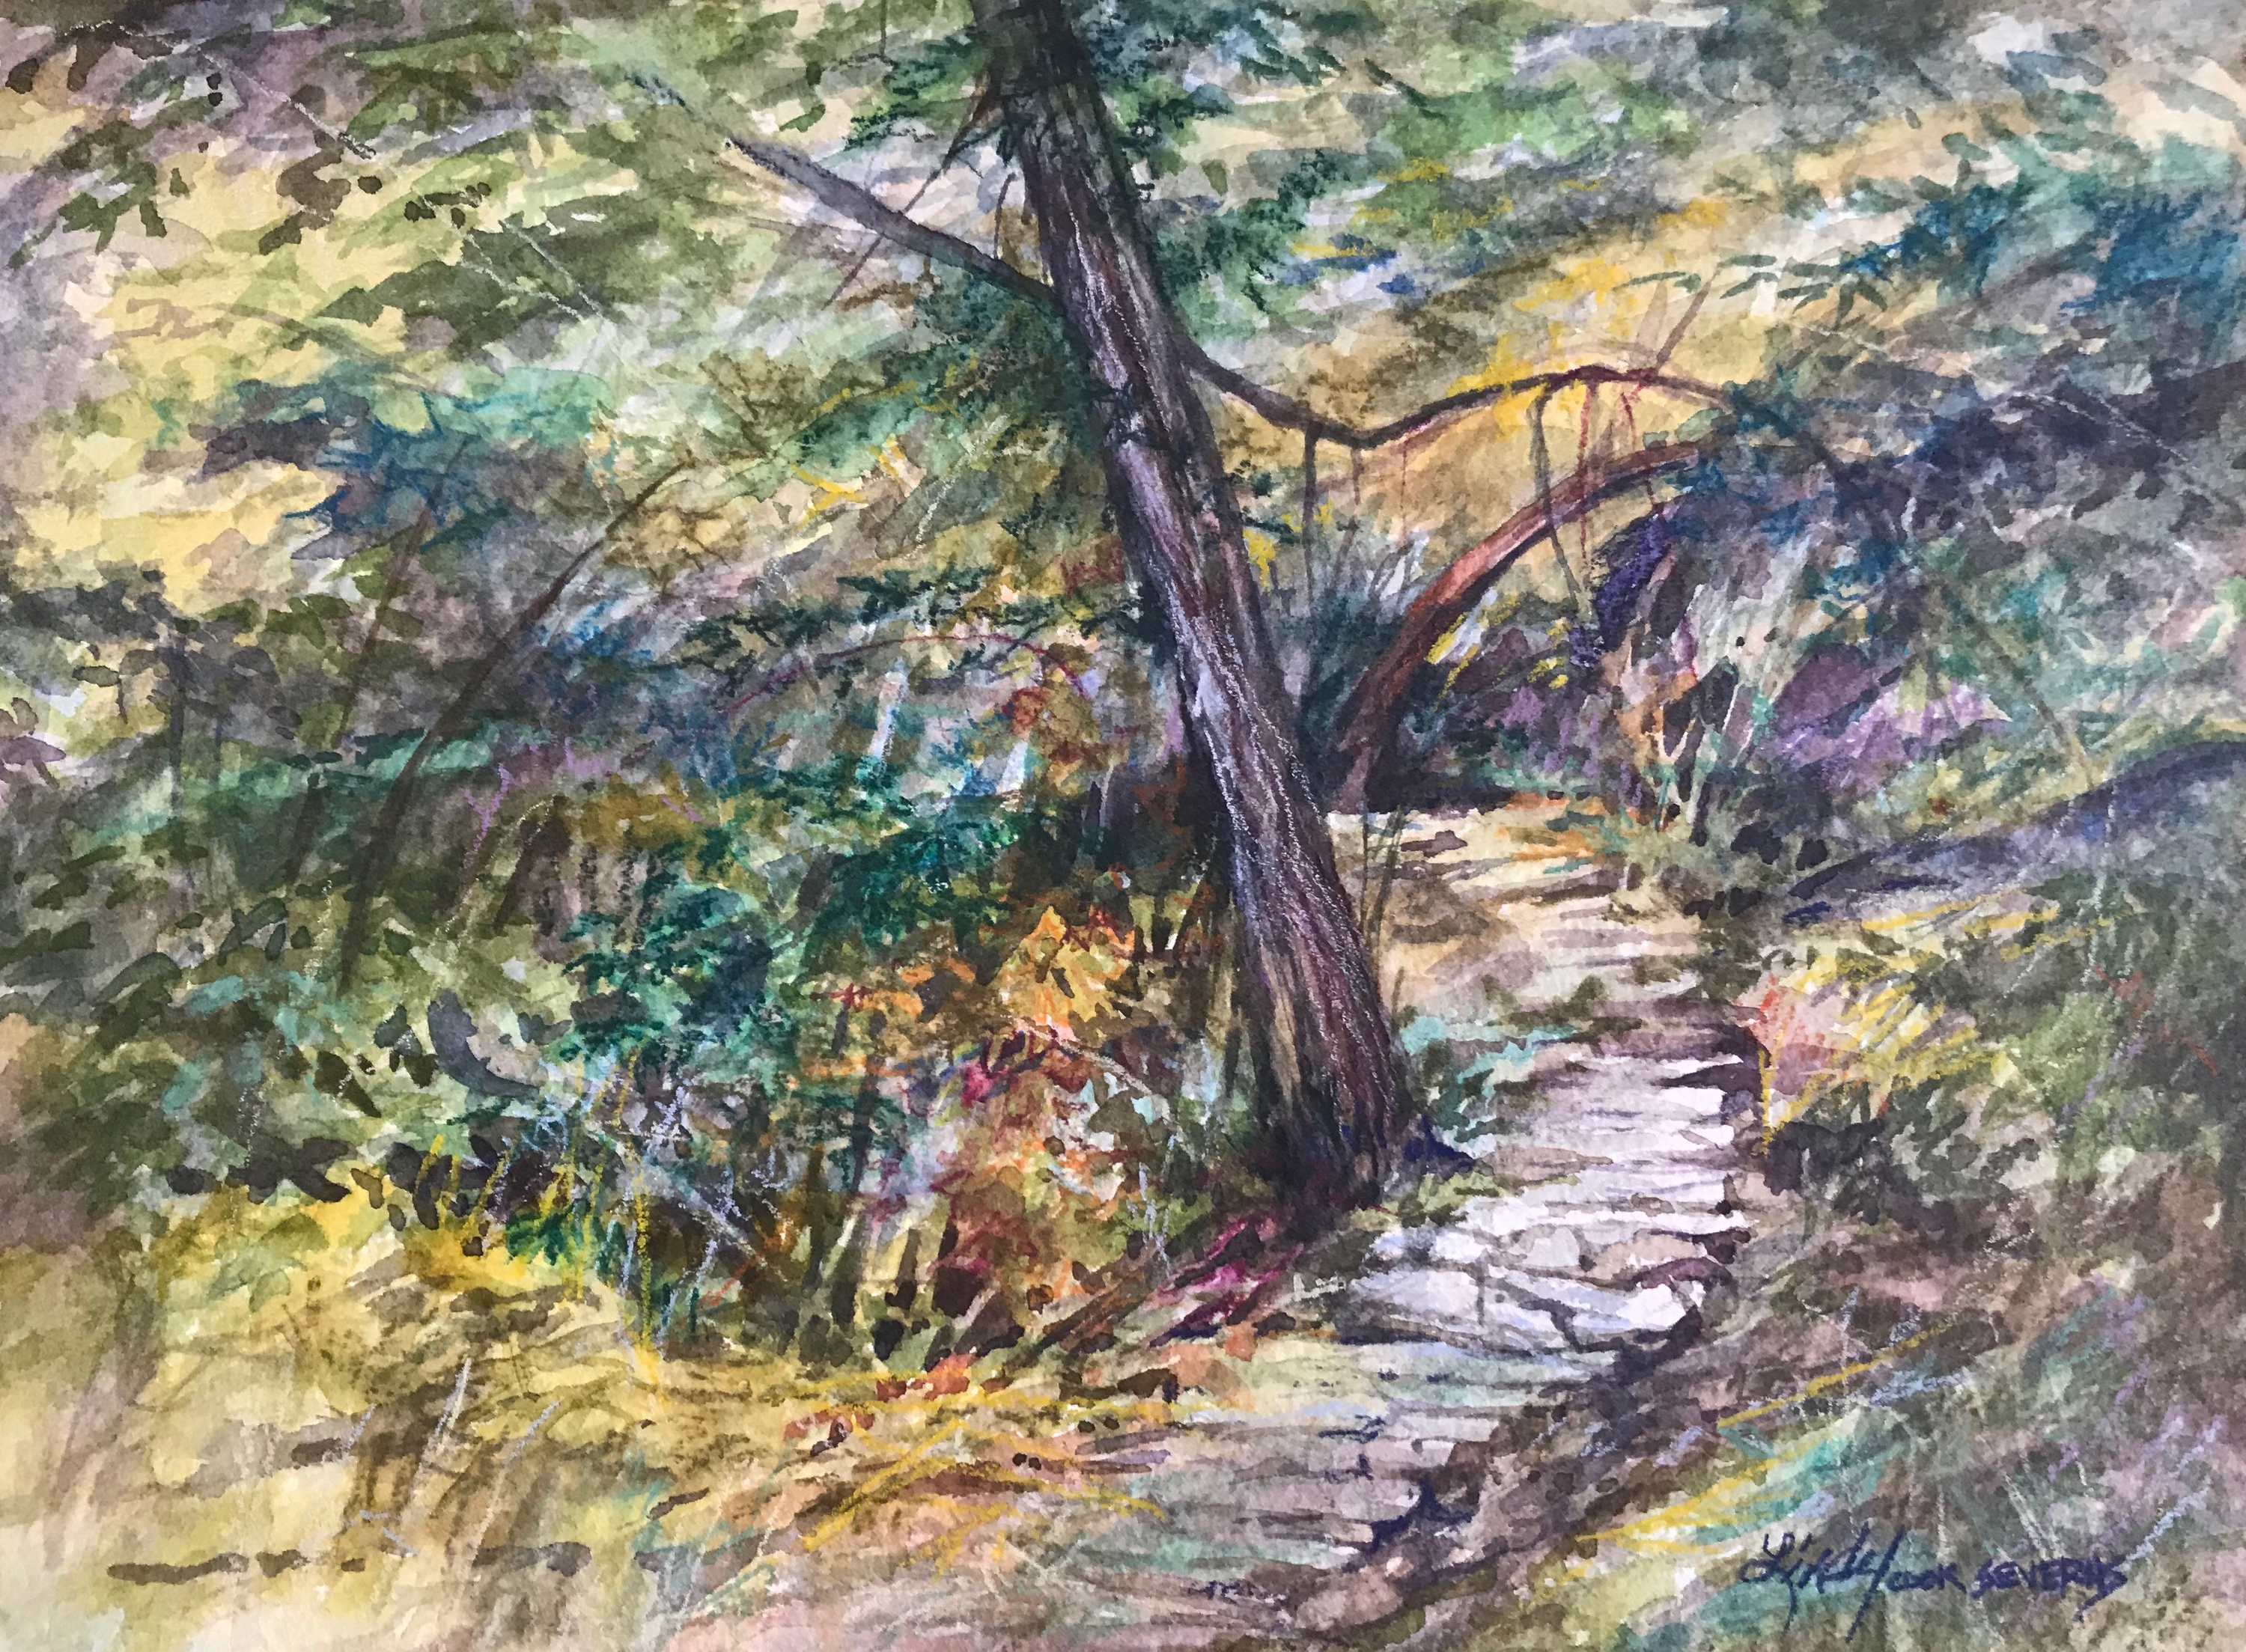 The path time forgot 8x10 watercolor lindy cook severns iyx9lz